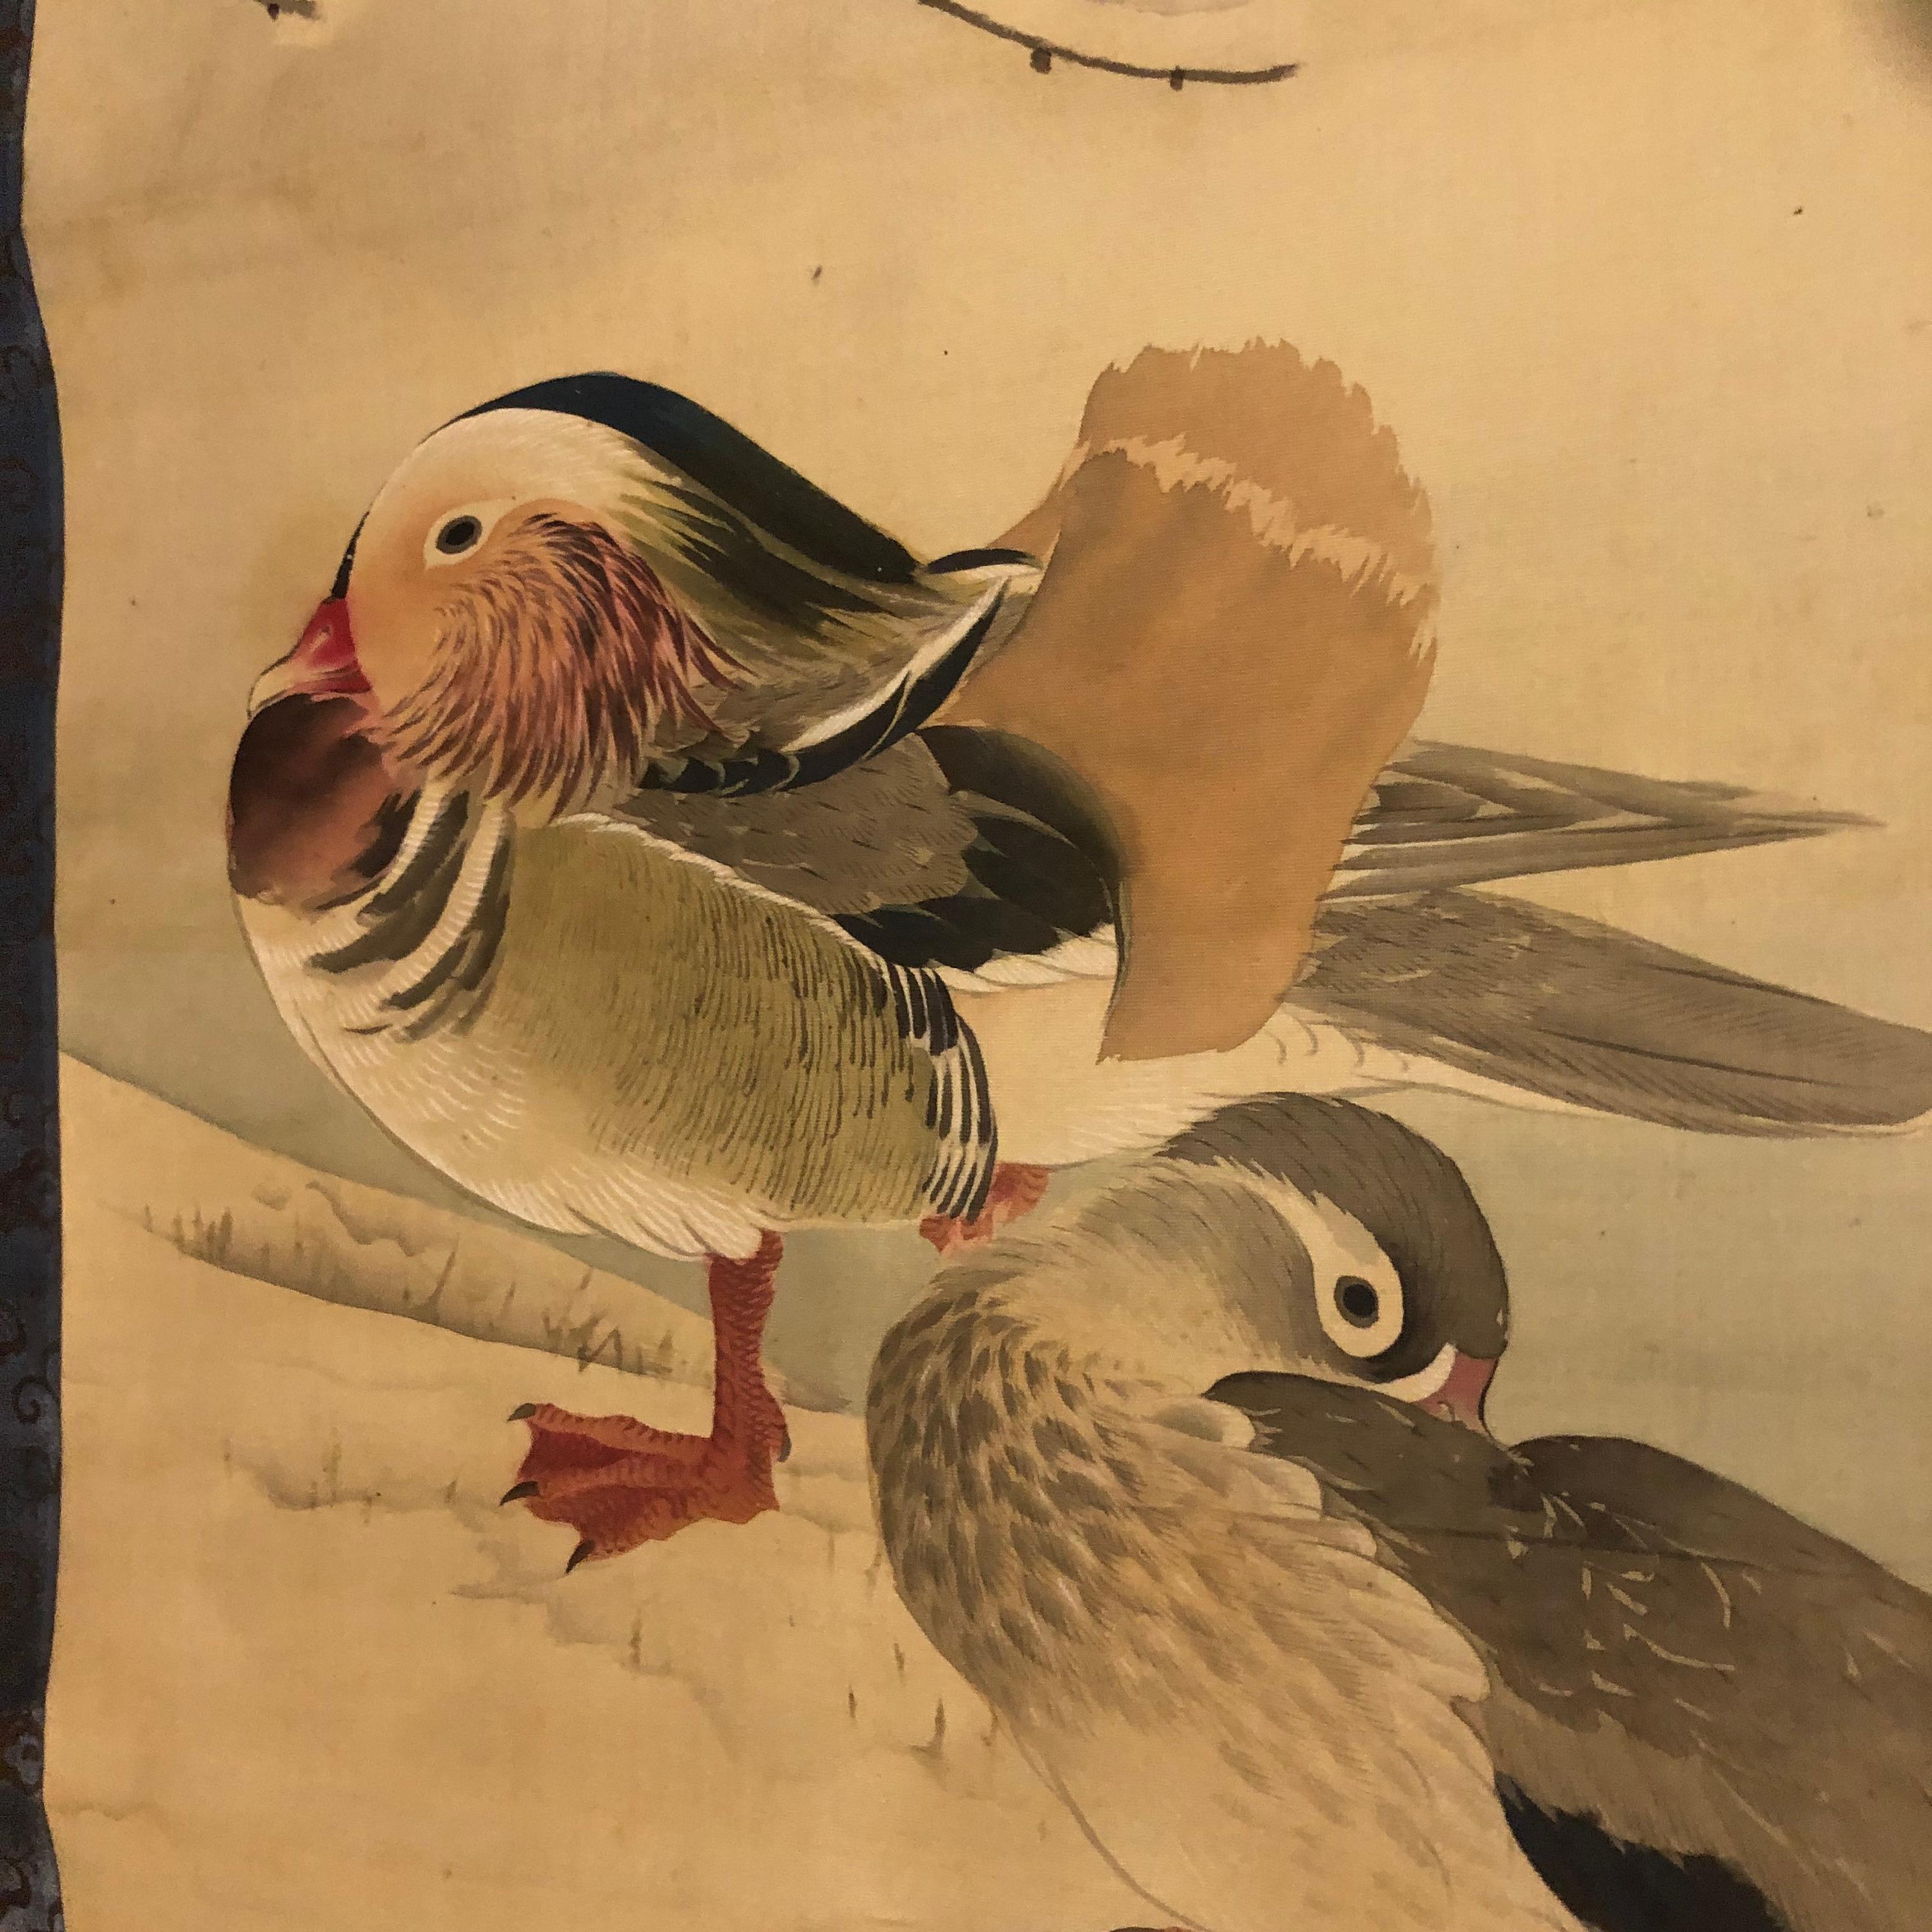 A very fine and bold Japanese antique hand painted silk scroll of two mandarin ducks underneath a sakura tree in full vibrant plume.

Meiji period.

Hand painting in lively colors with great details, signed.

Dimensions: 23 inches wide and